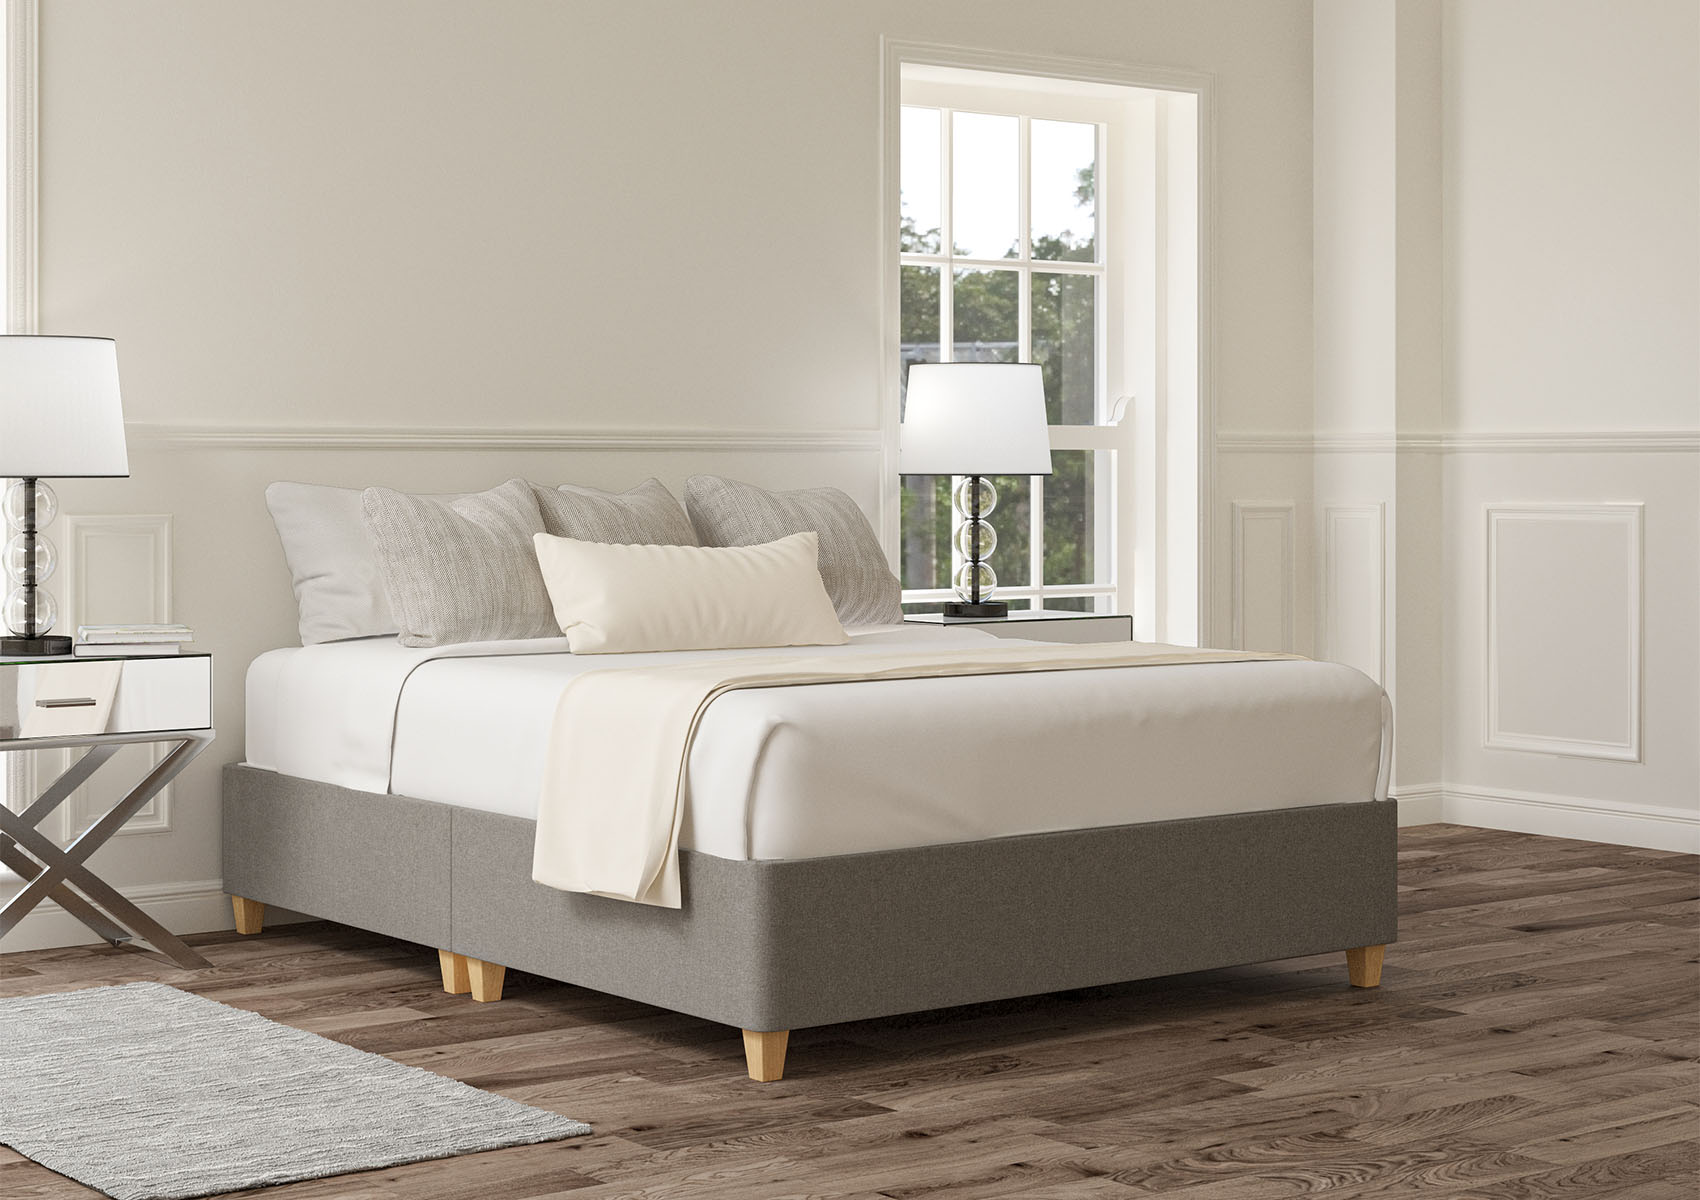 View Shallow Naples Cream Upholstered Single Bed Time4Sleep information